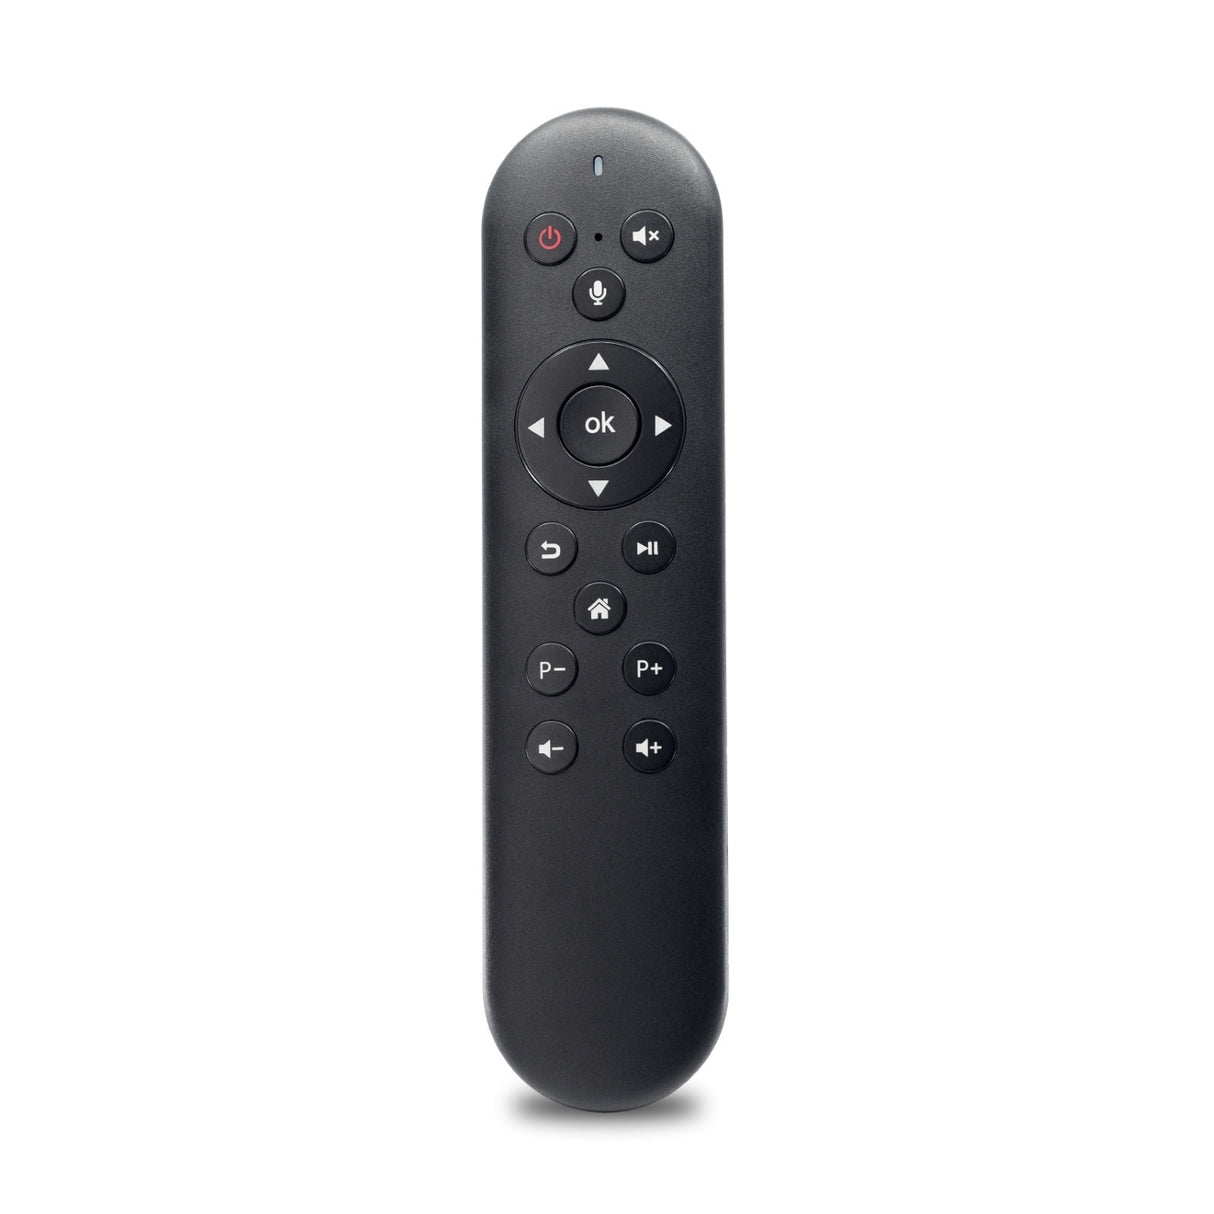 ENGLAON TV remote control for Smart TVs